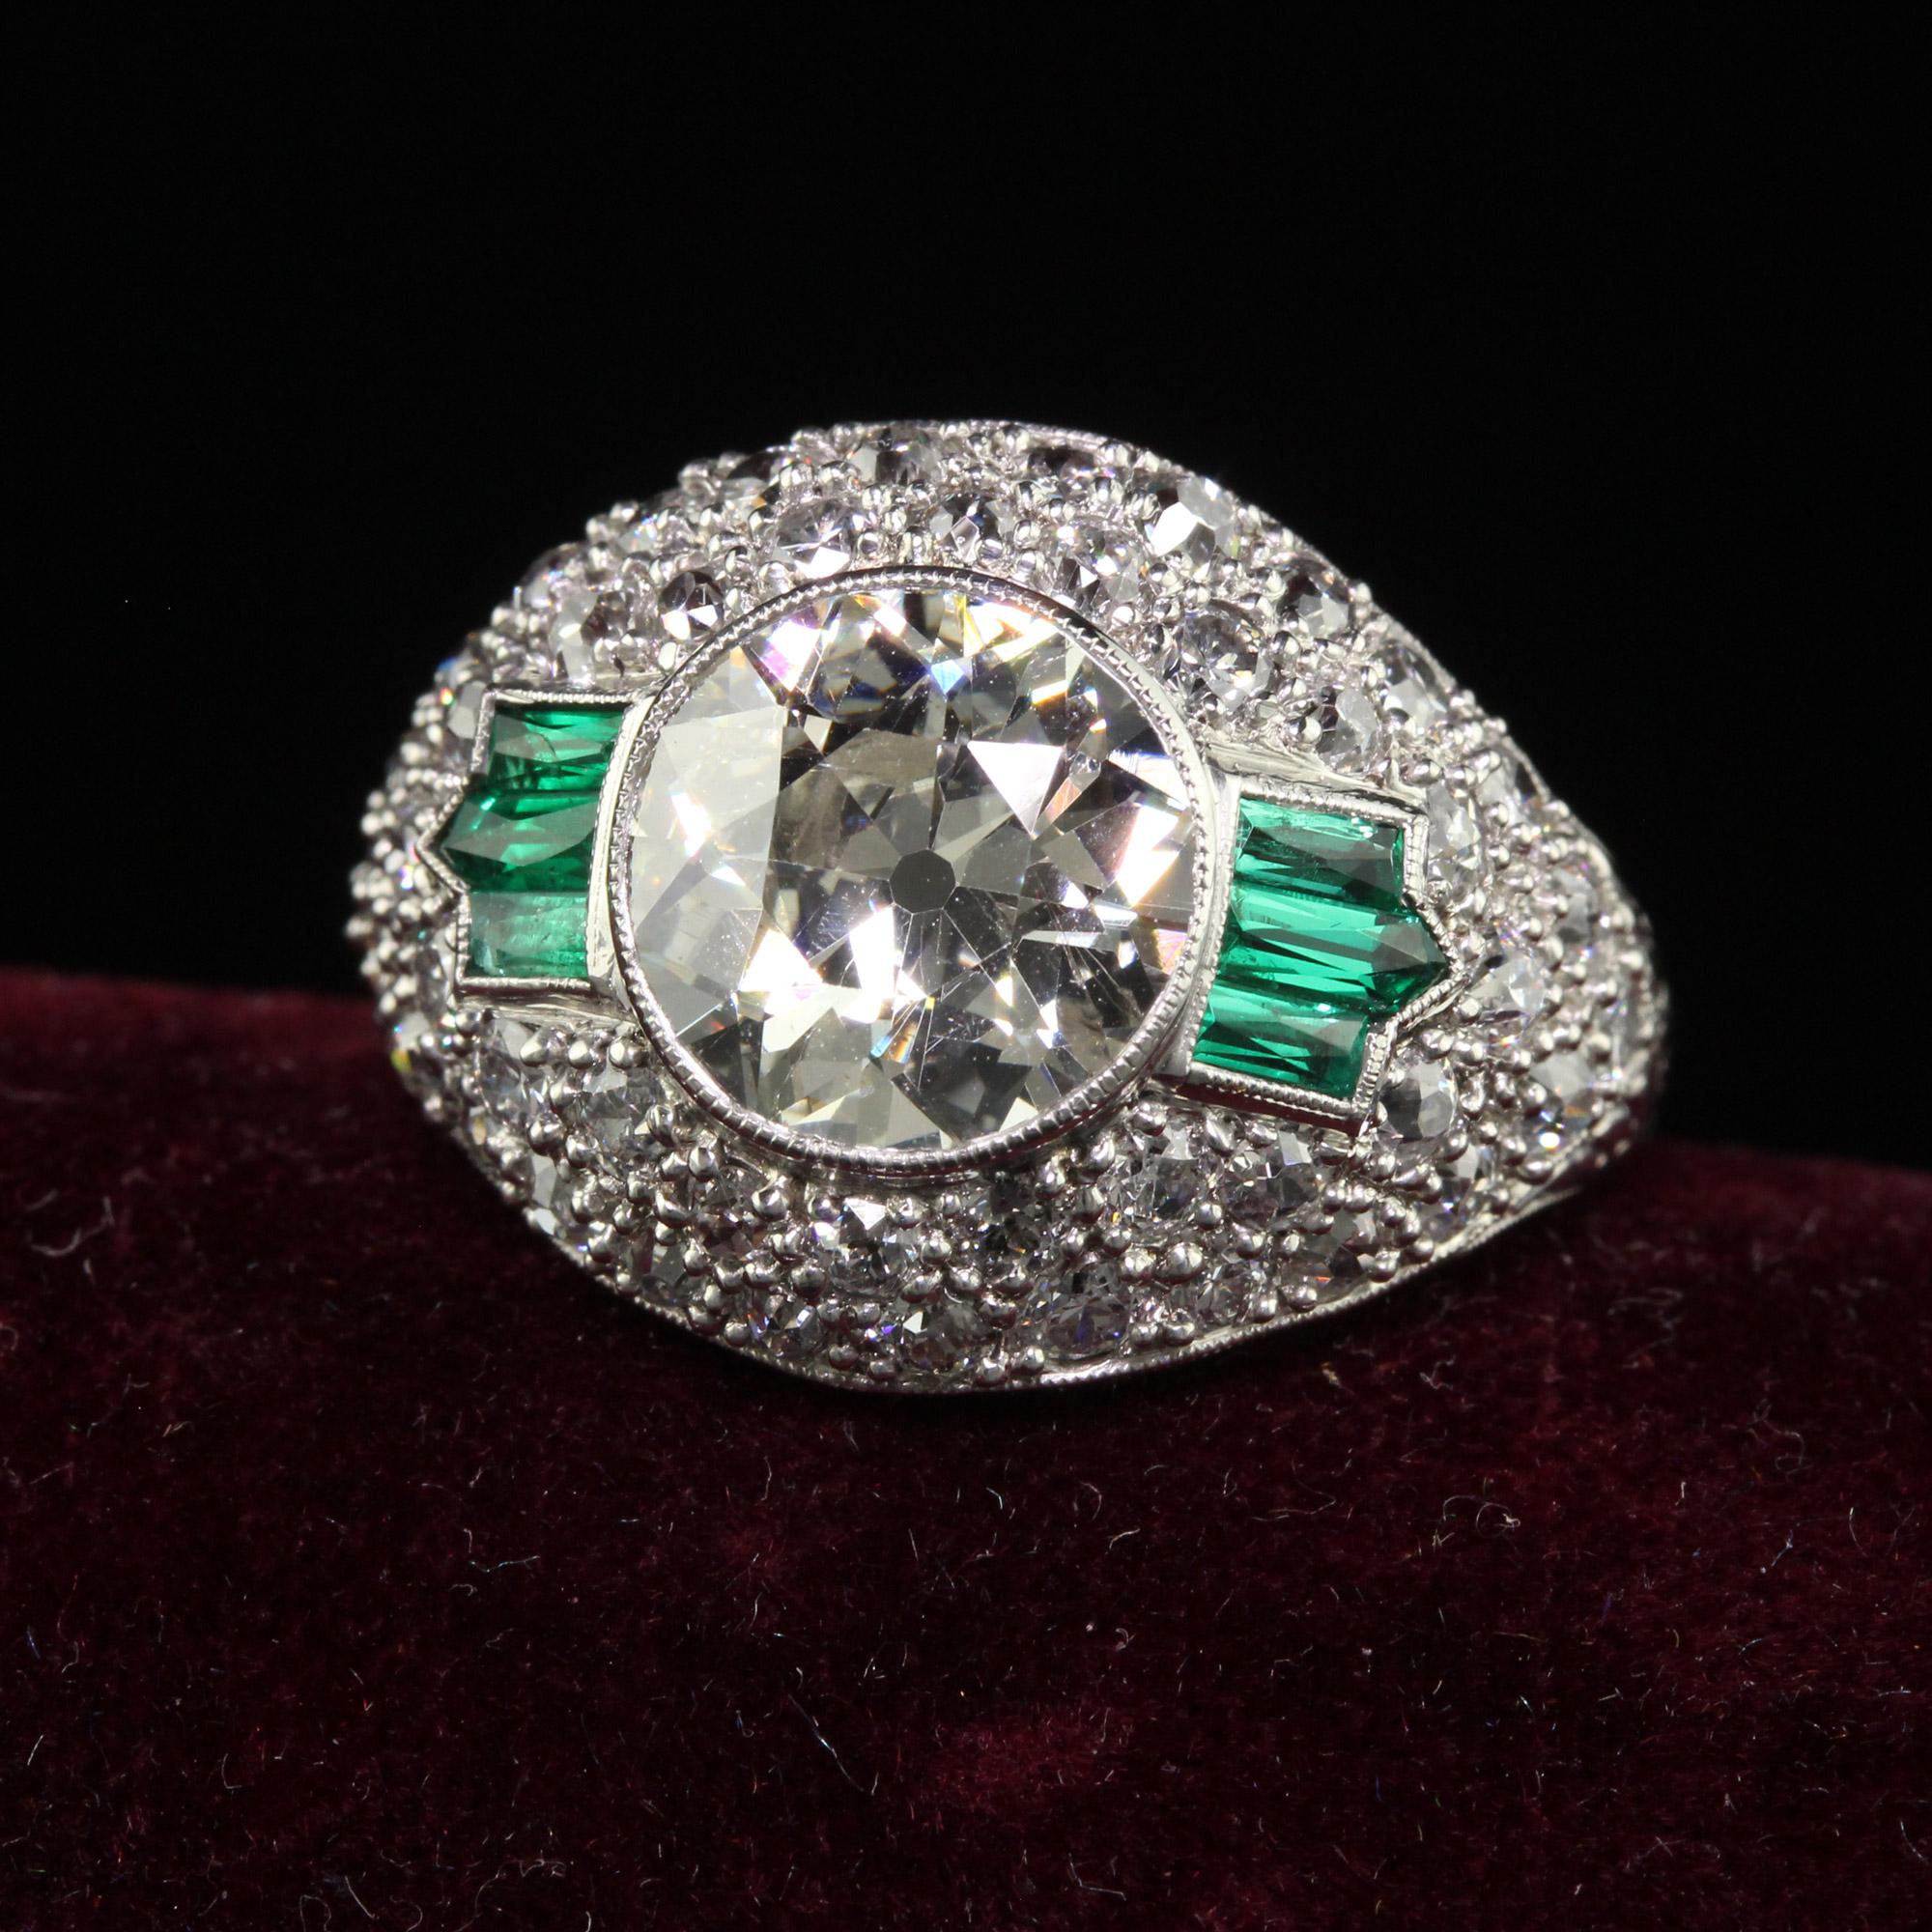 Beautiful Antique Art Deco Platinum Old European Diamond and Emerald Engagement Ring - GIA. This incredible art deco old European diamond engagement ring is crafted in platinum. The center holds a gorgeous old European cut diamond that has a GIA